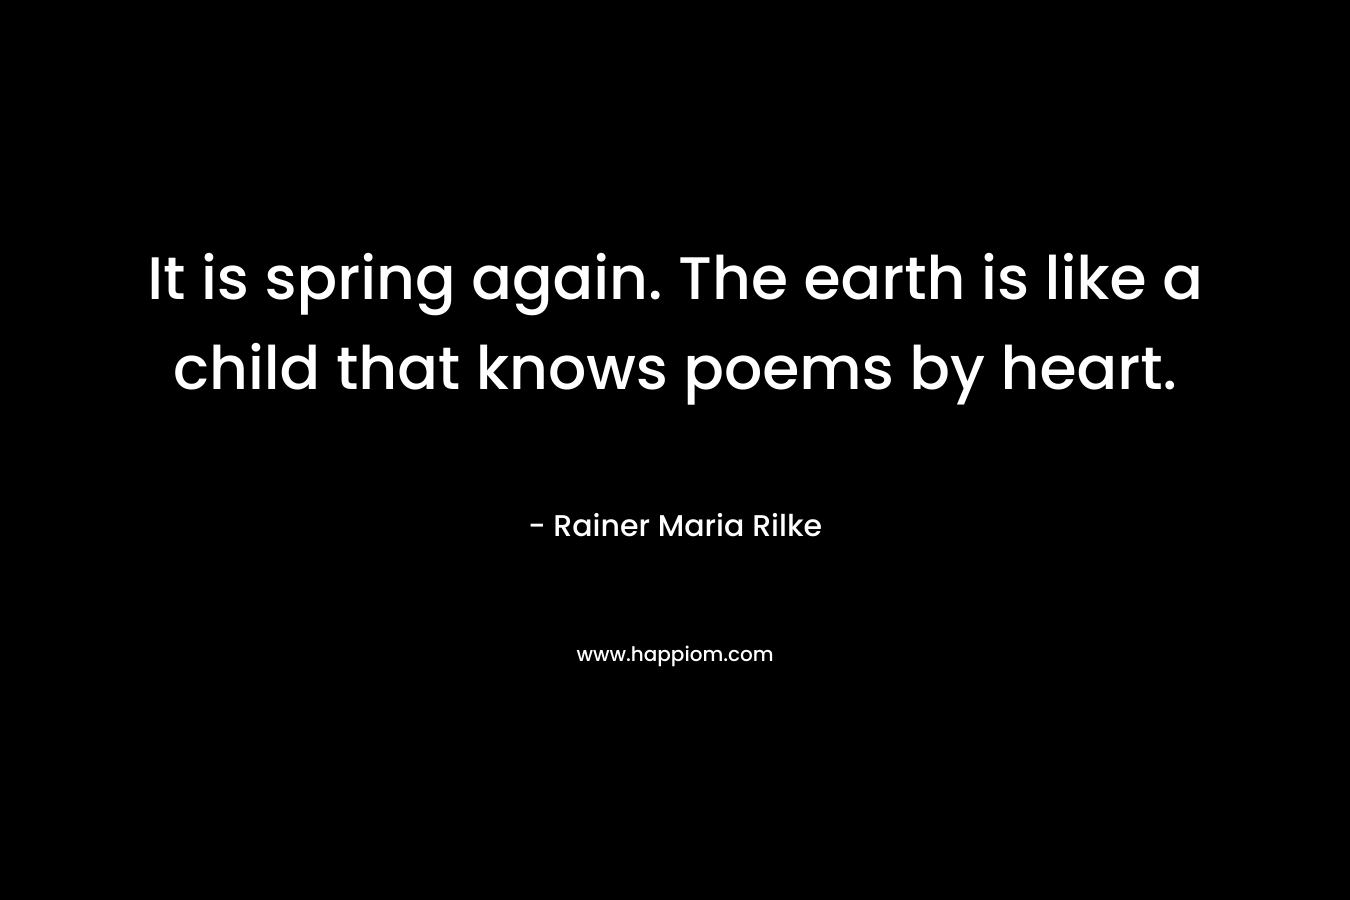 It is spring again. The earth is like a child that knows poems by heart.